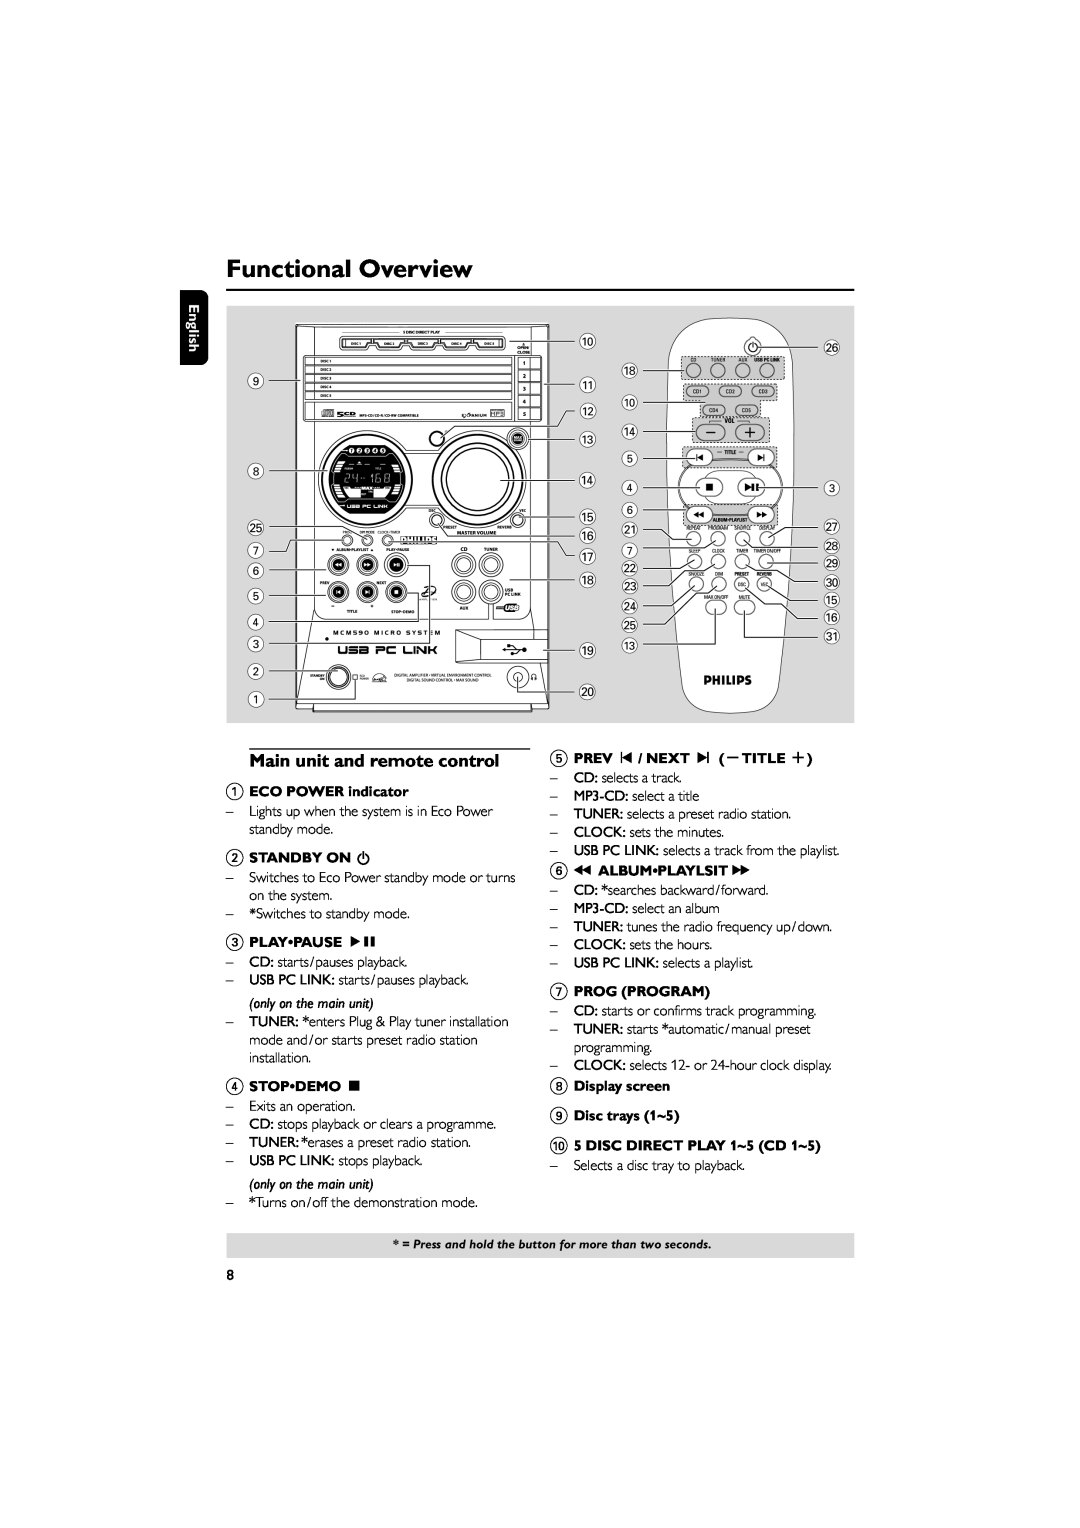 Philips pmn manual Functional Overview, Main unit and remote control 